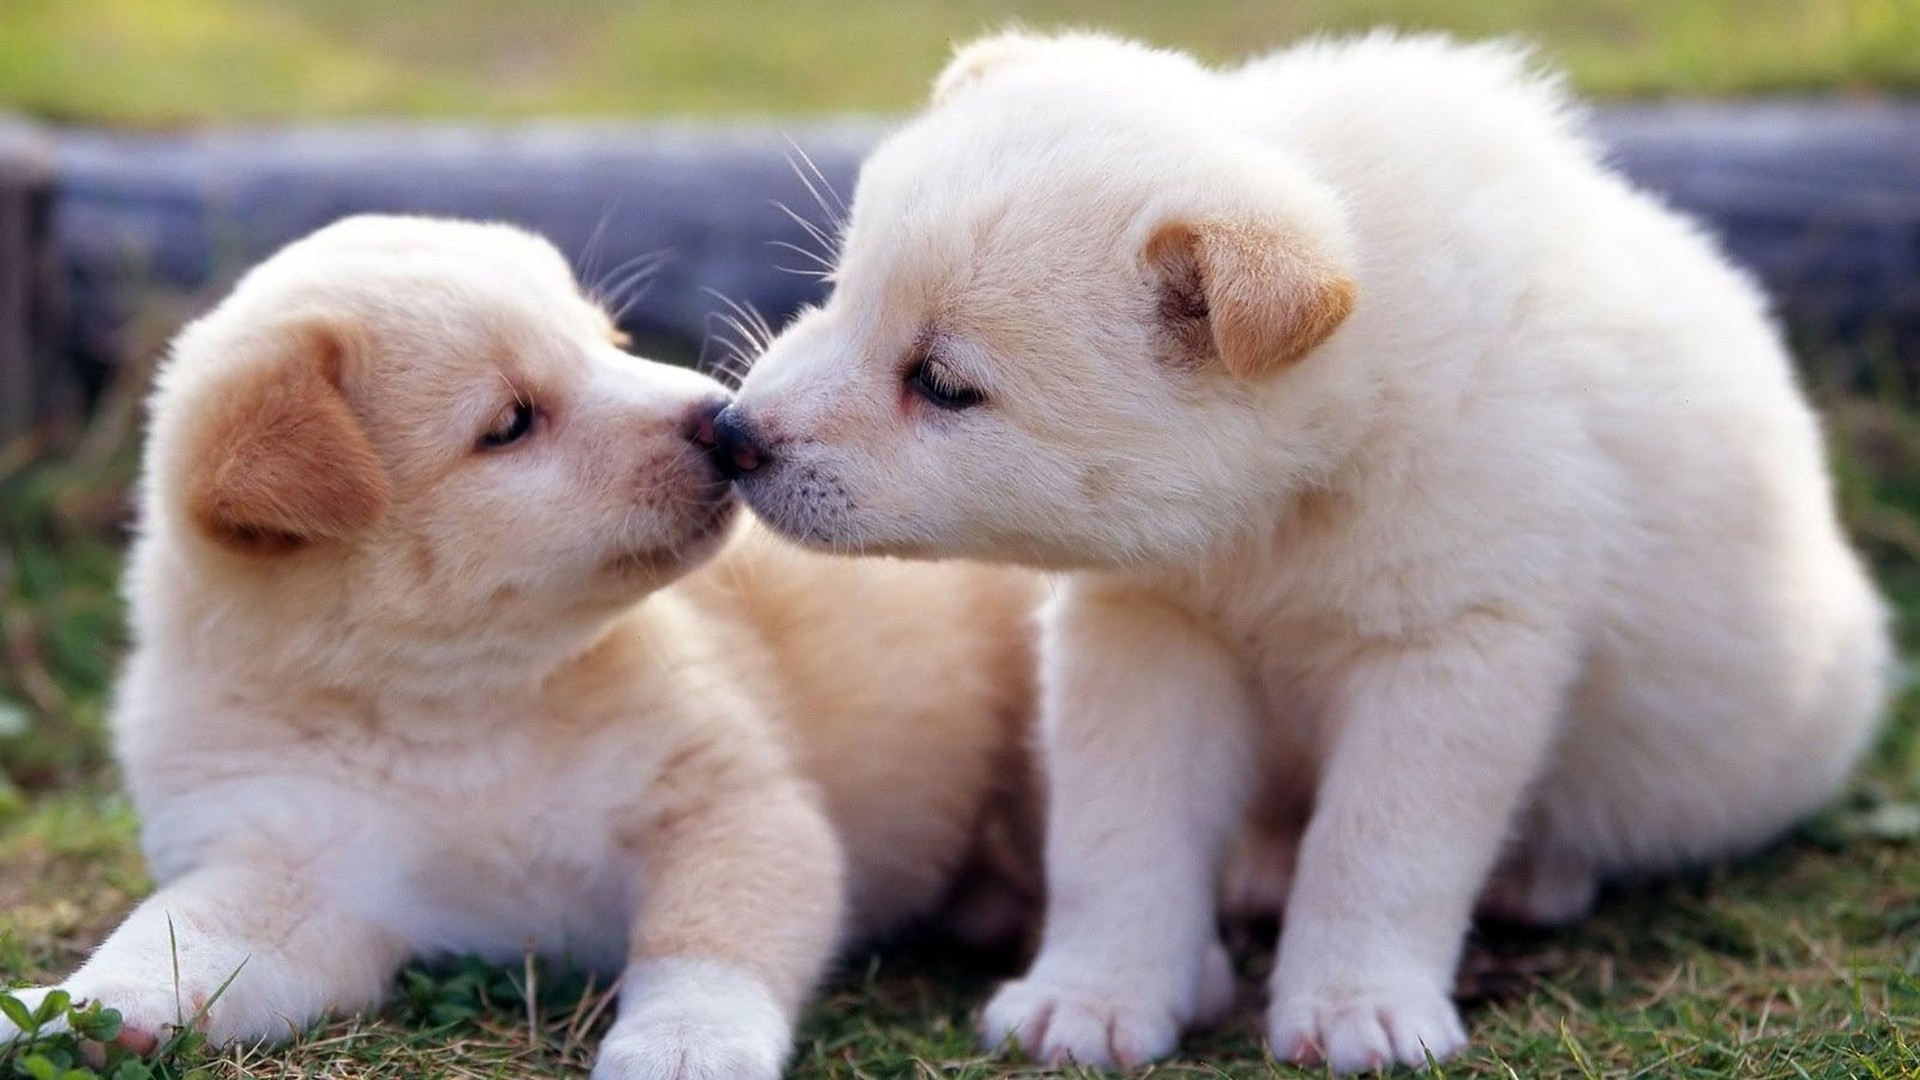 Cute Puppies Pictures HD Wallpaper 1920x1080